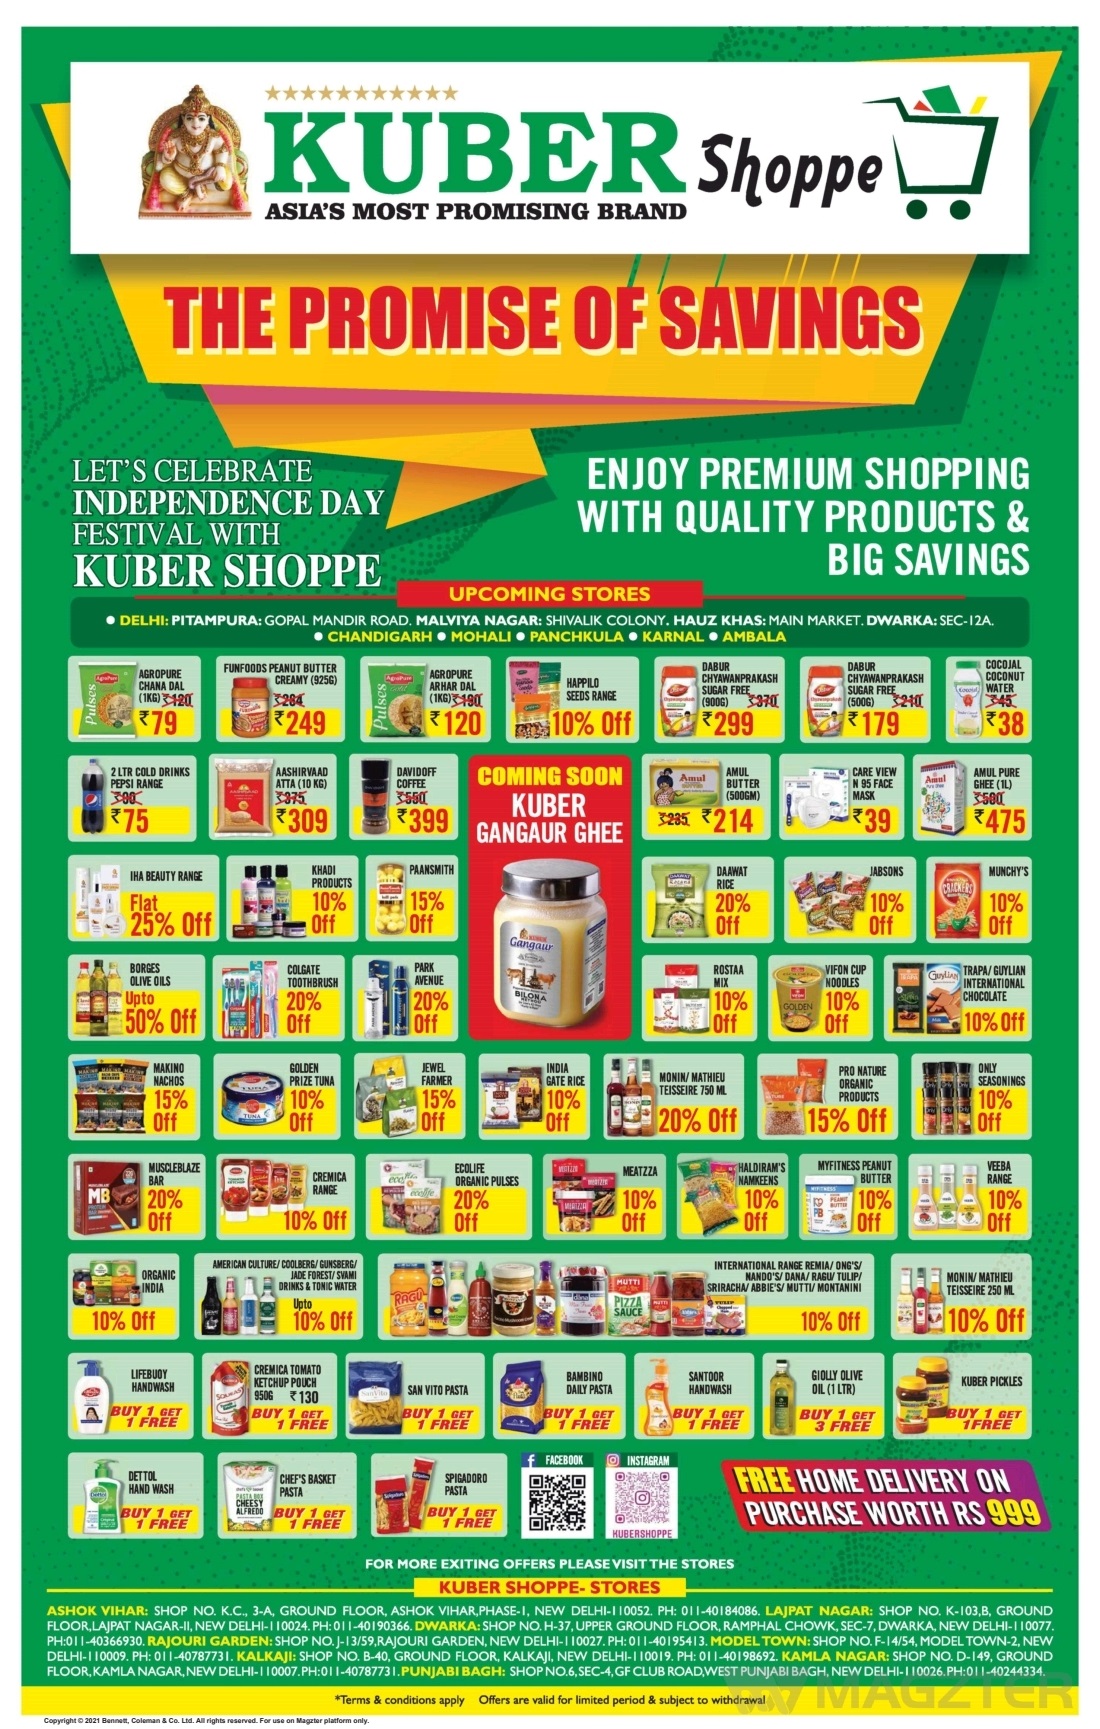 Kuber Shoppe Independence Day offers